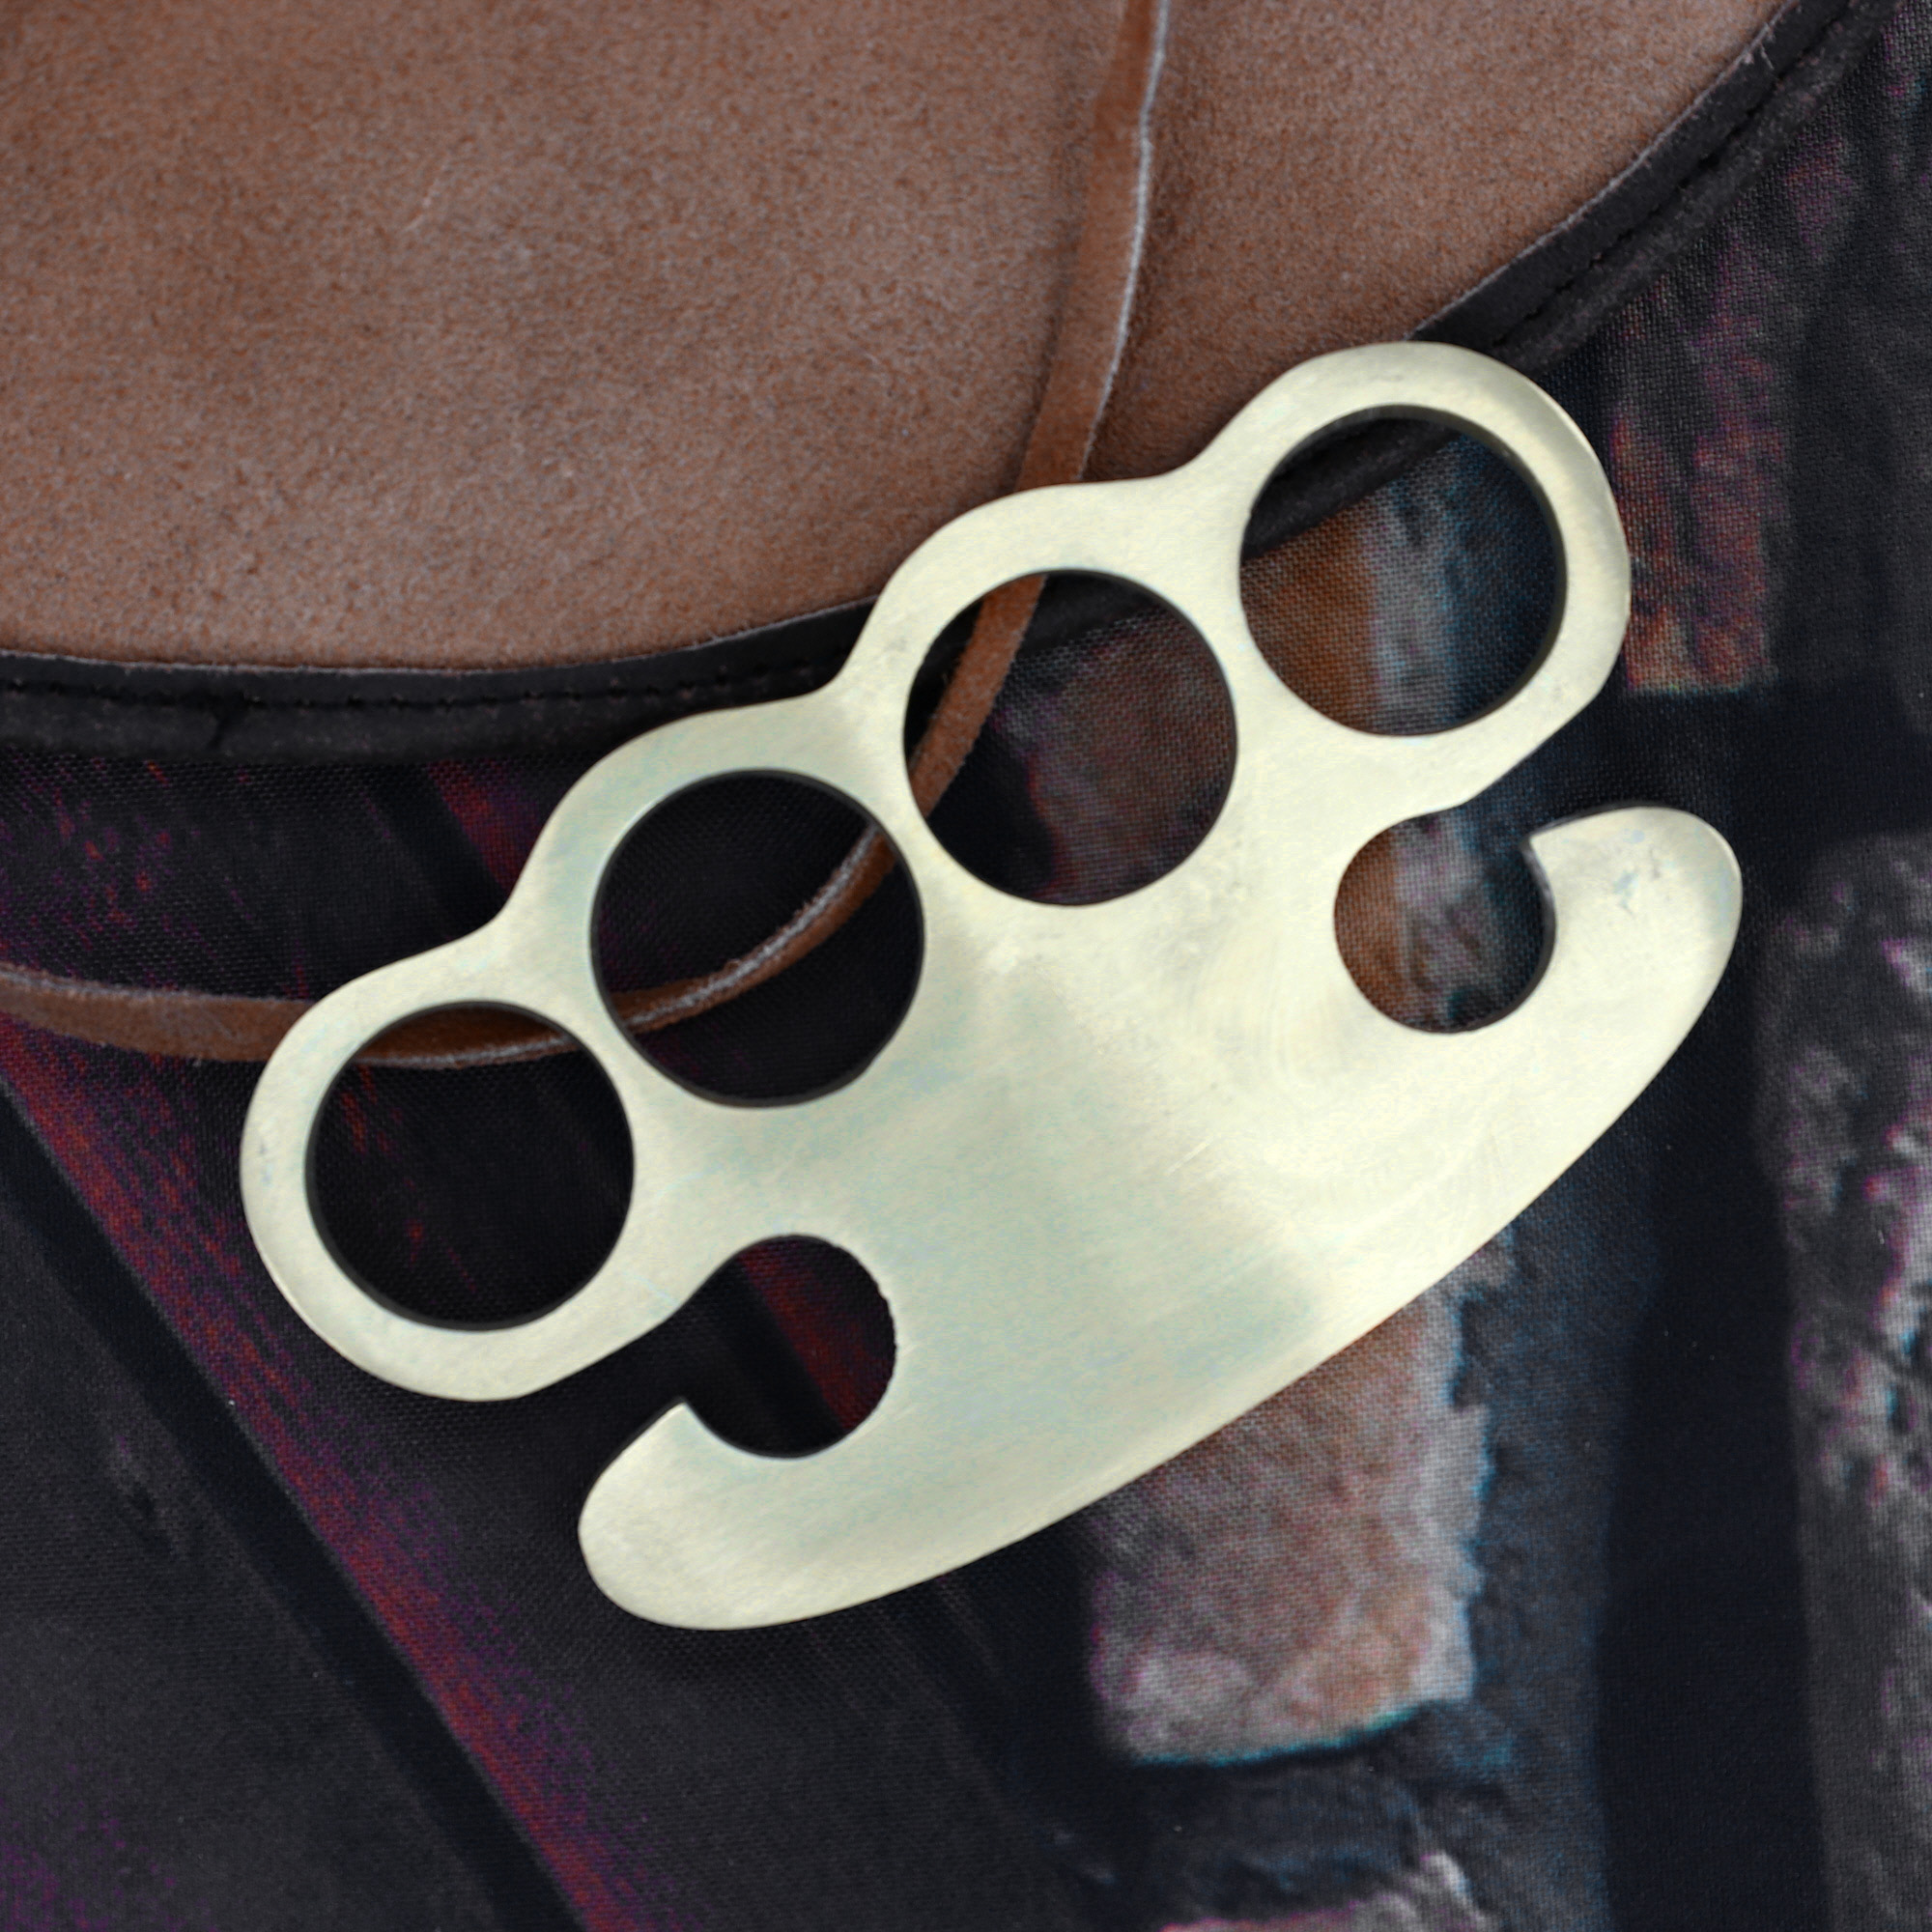 Last Chance 100% Solid Brass Knuckle Duster Novelty Paper Weight